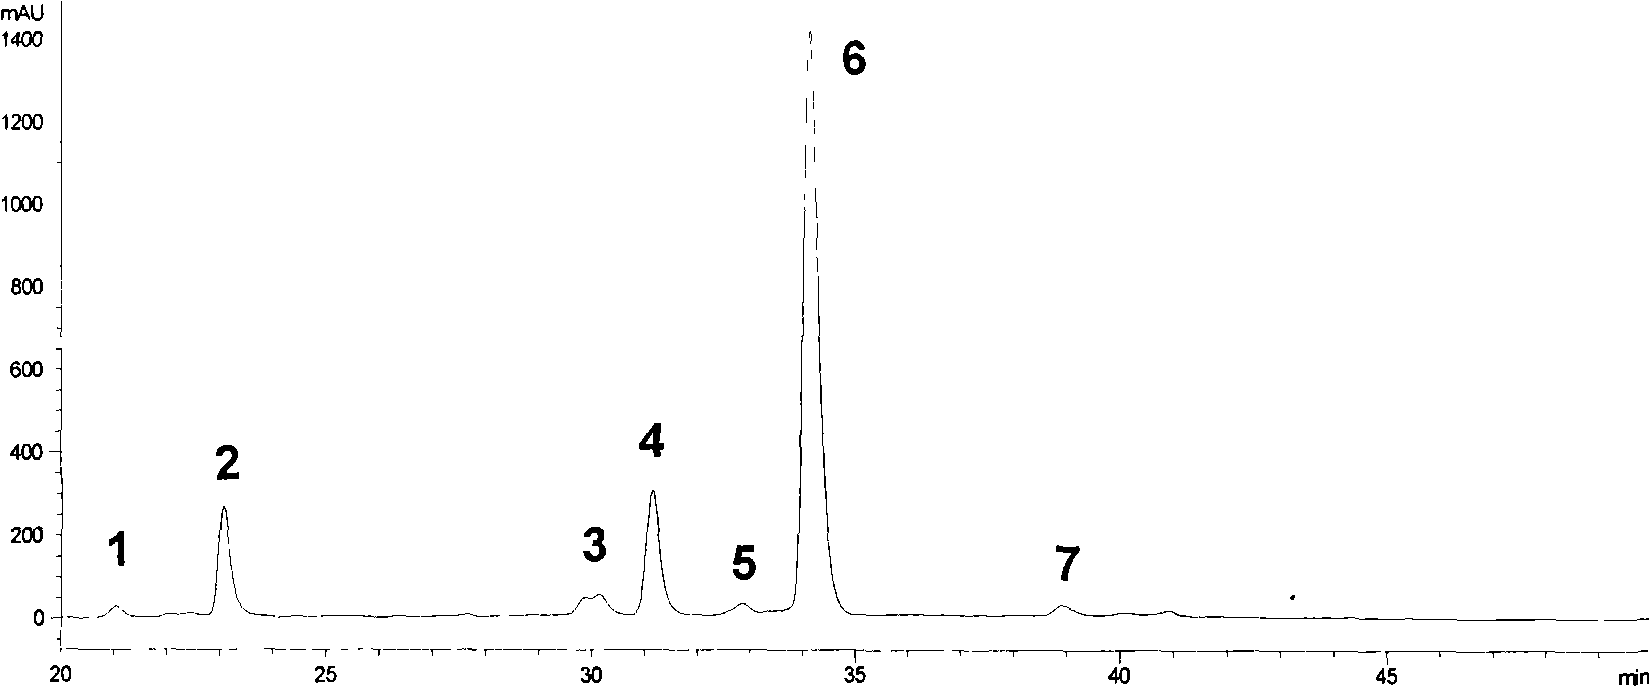 A medicine containing caffeic acid 3,4-dihydroxyl phenethyl ester and its uses